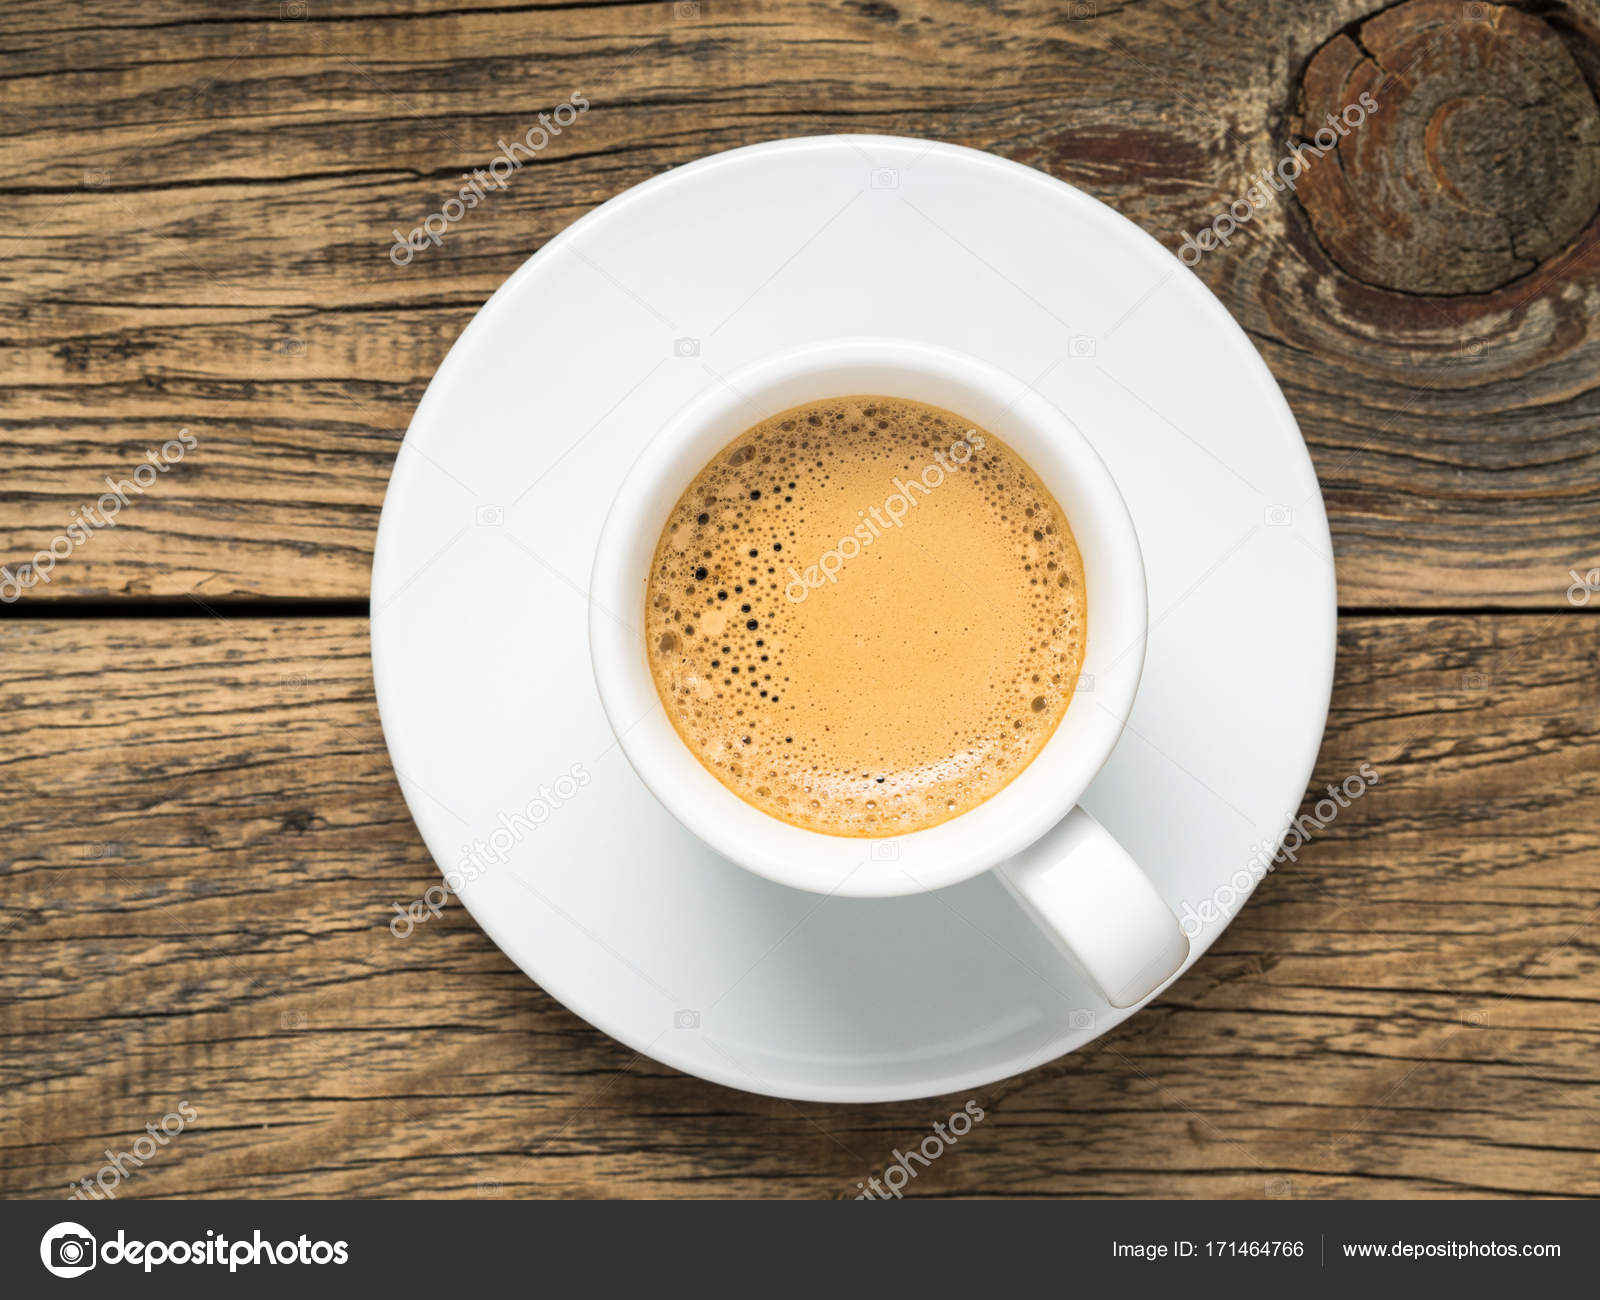 black frothy coffee in white cup — Stock Photo © NataBene #171464766